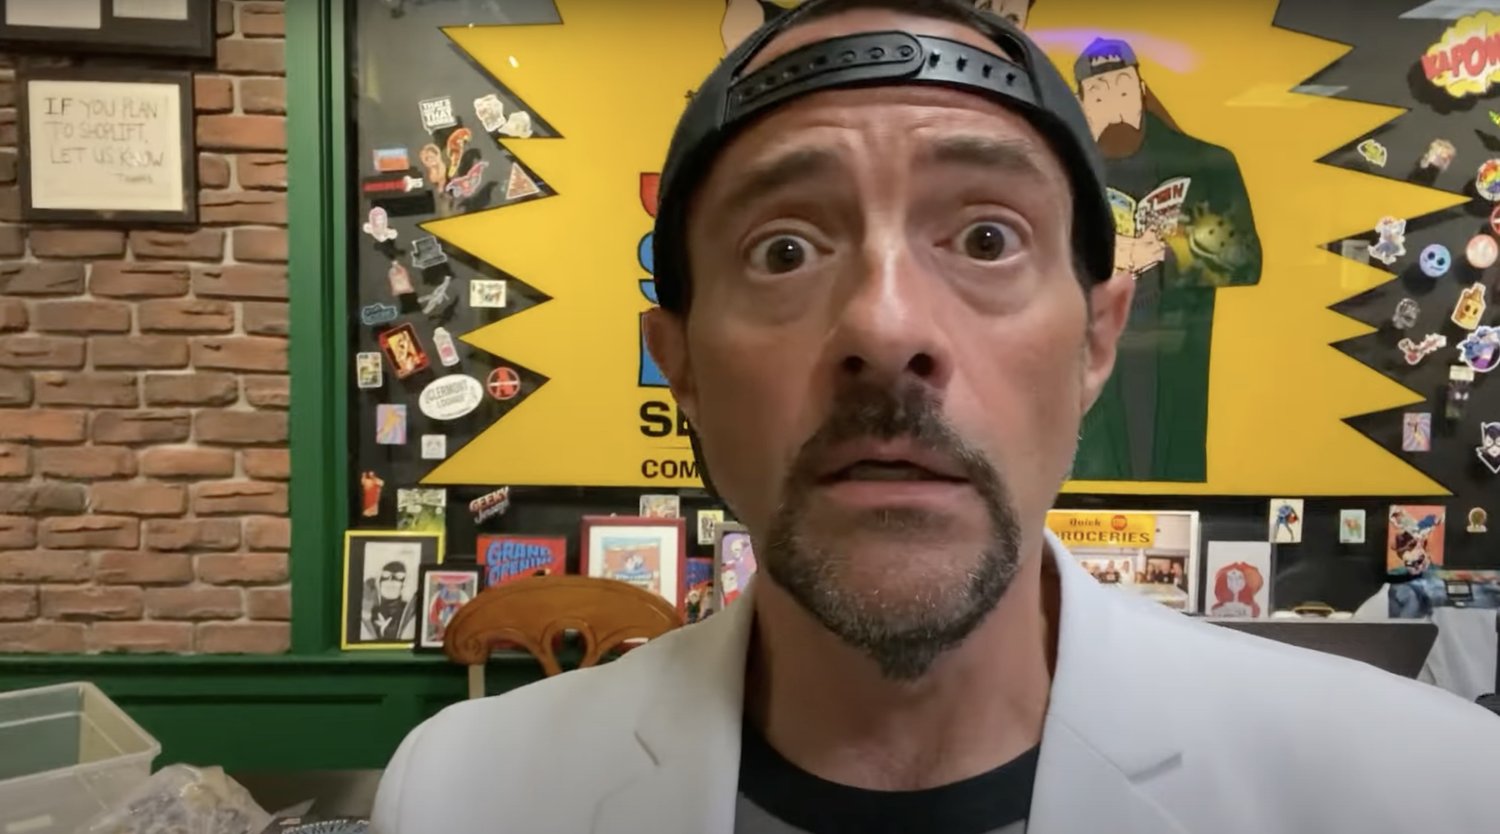 Kevin Smith Launching a Mail-Order Subscription Service for Jay & Silent Bob’s Secret Stash
      
    @media(min-width:0px){#div-gpt-ad-geektyrant_com-box-3-0-asloaded{max-width:728px!important;max-height:90px!important;}}